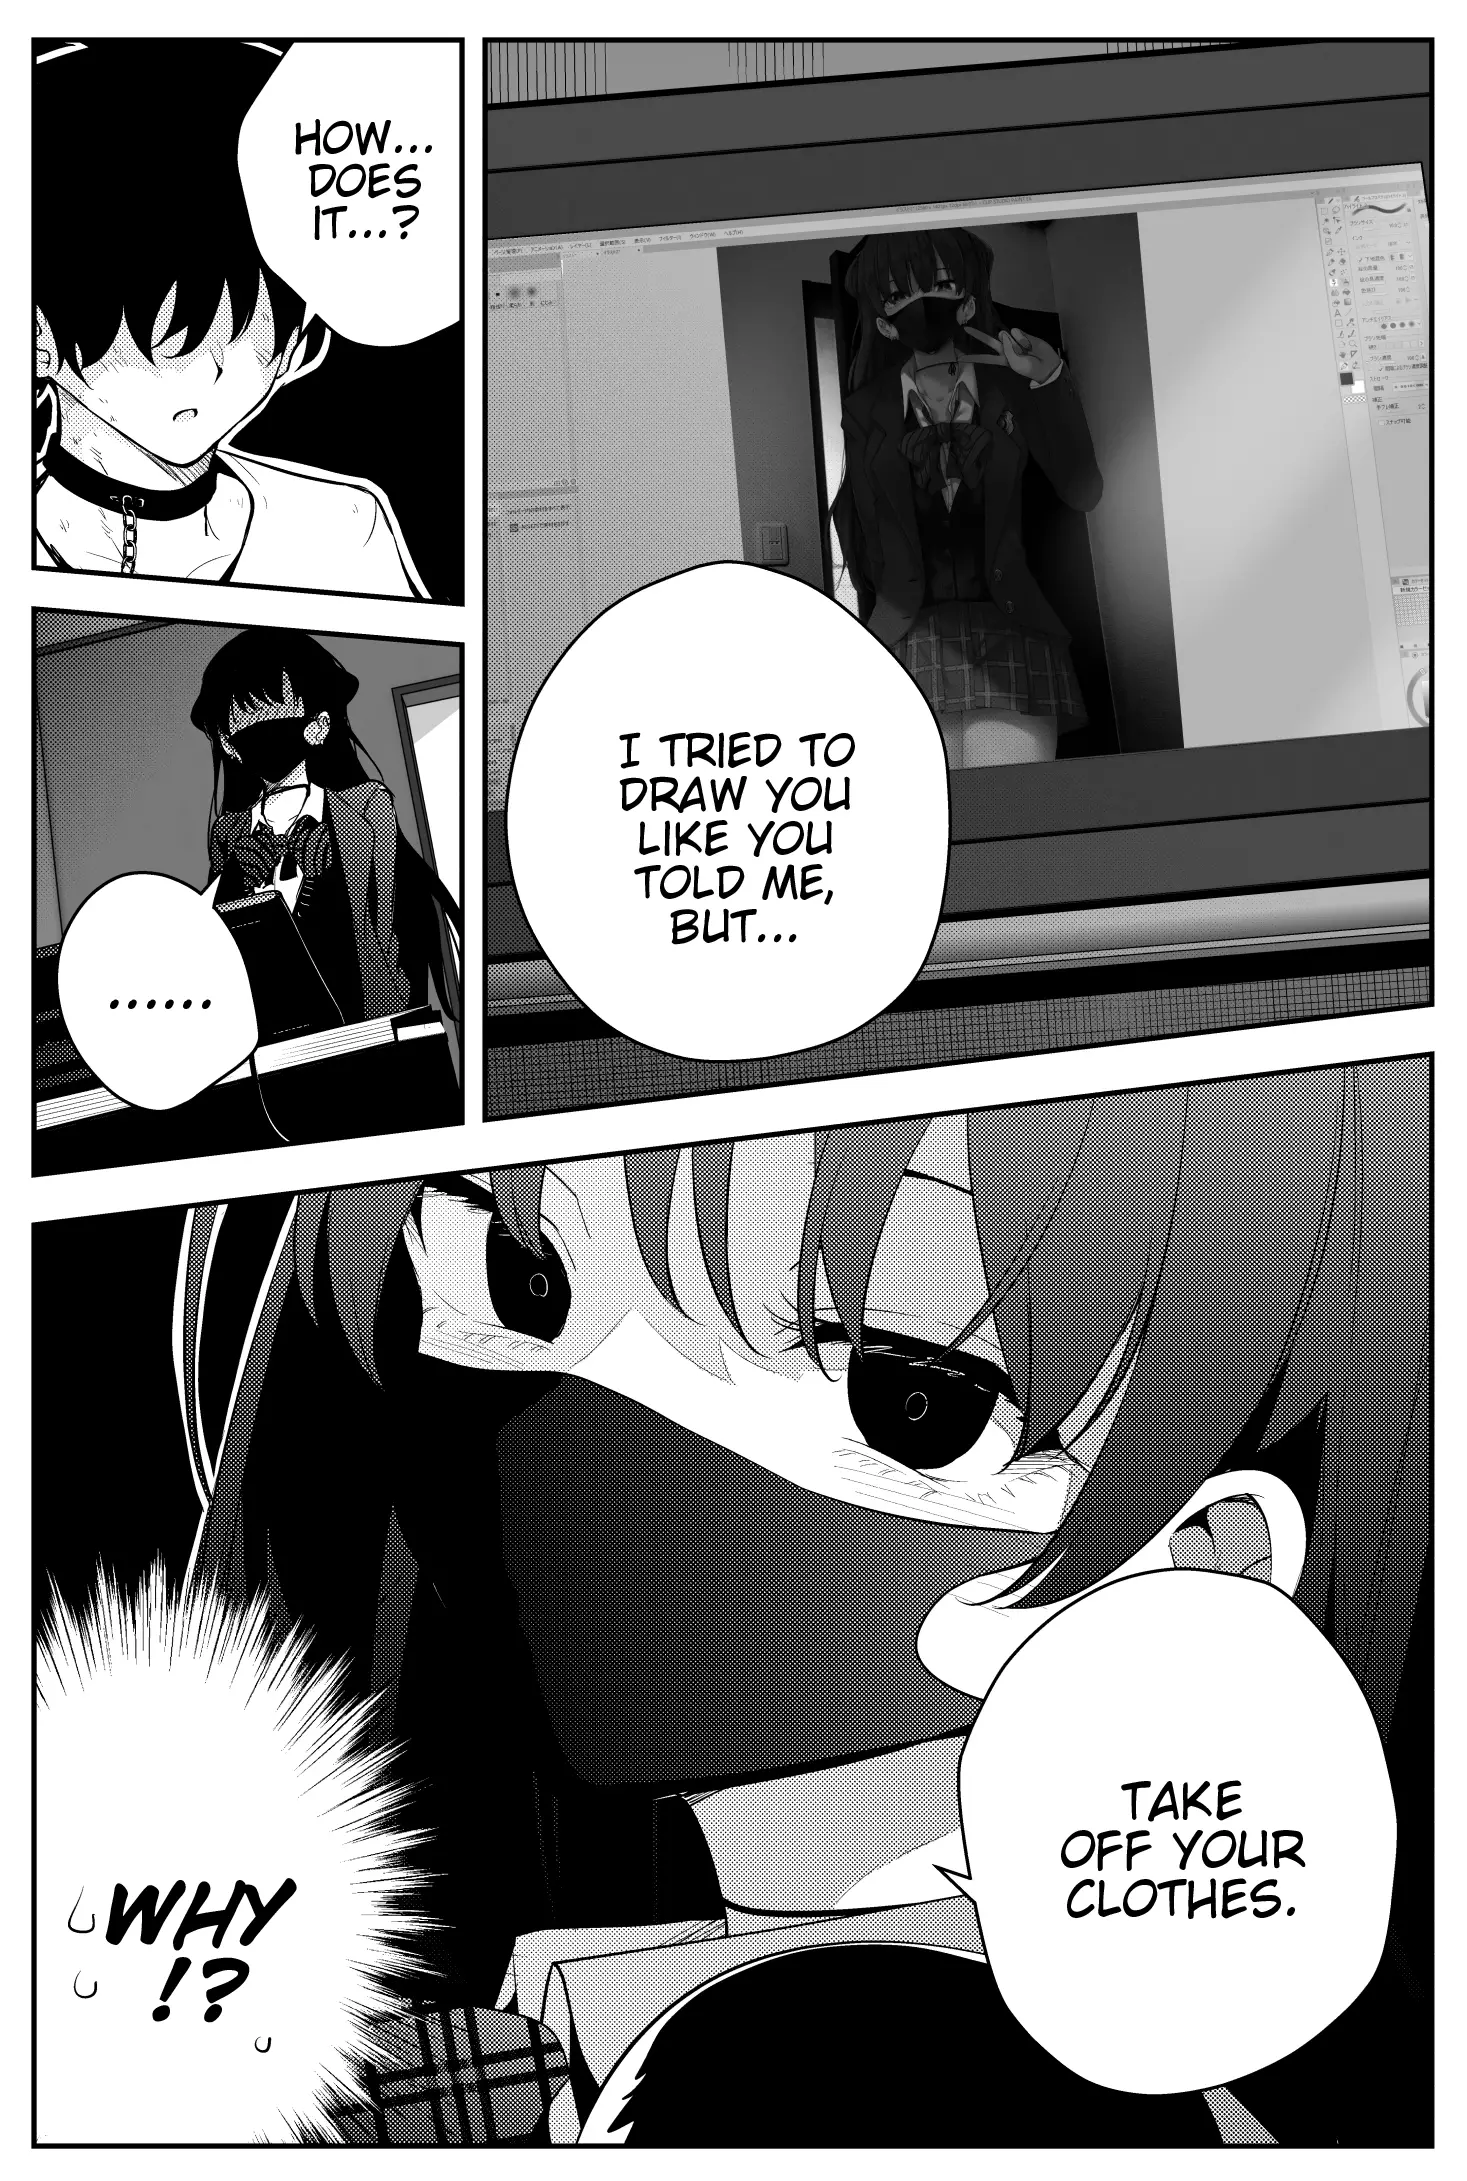 The Story Of A Manga Artist Confined By A Strange High School Girl - 4 page 1-75b0ffdf